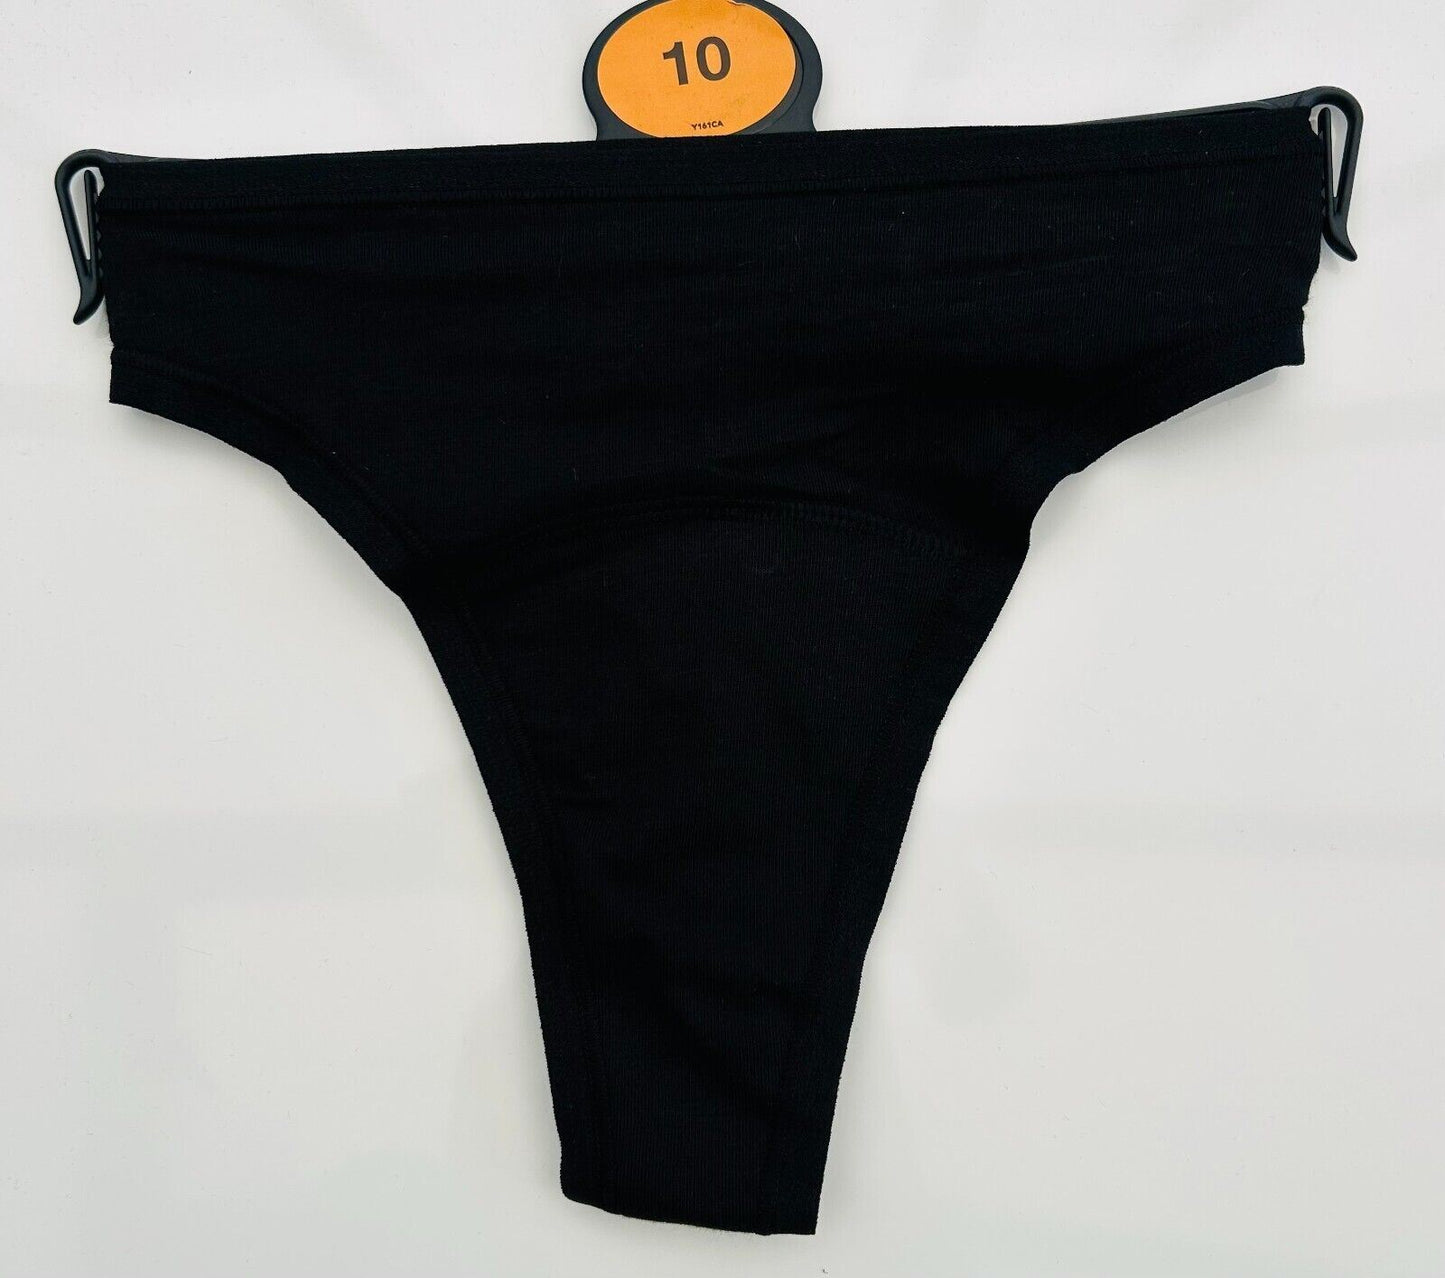 Ex Famous Store Brand Period Knickers Confidence Thongs Menstrual Leak Proof Light Absorbency